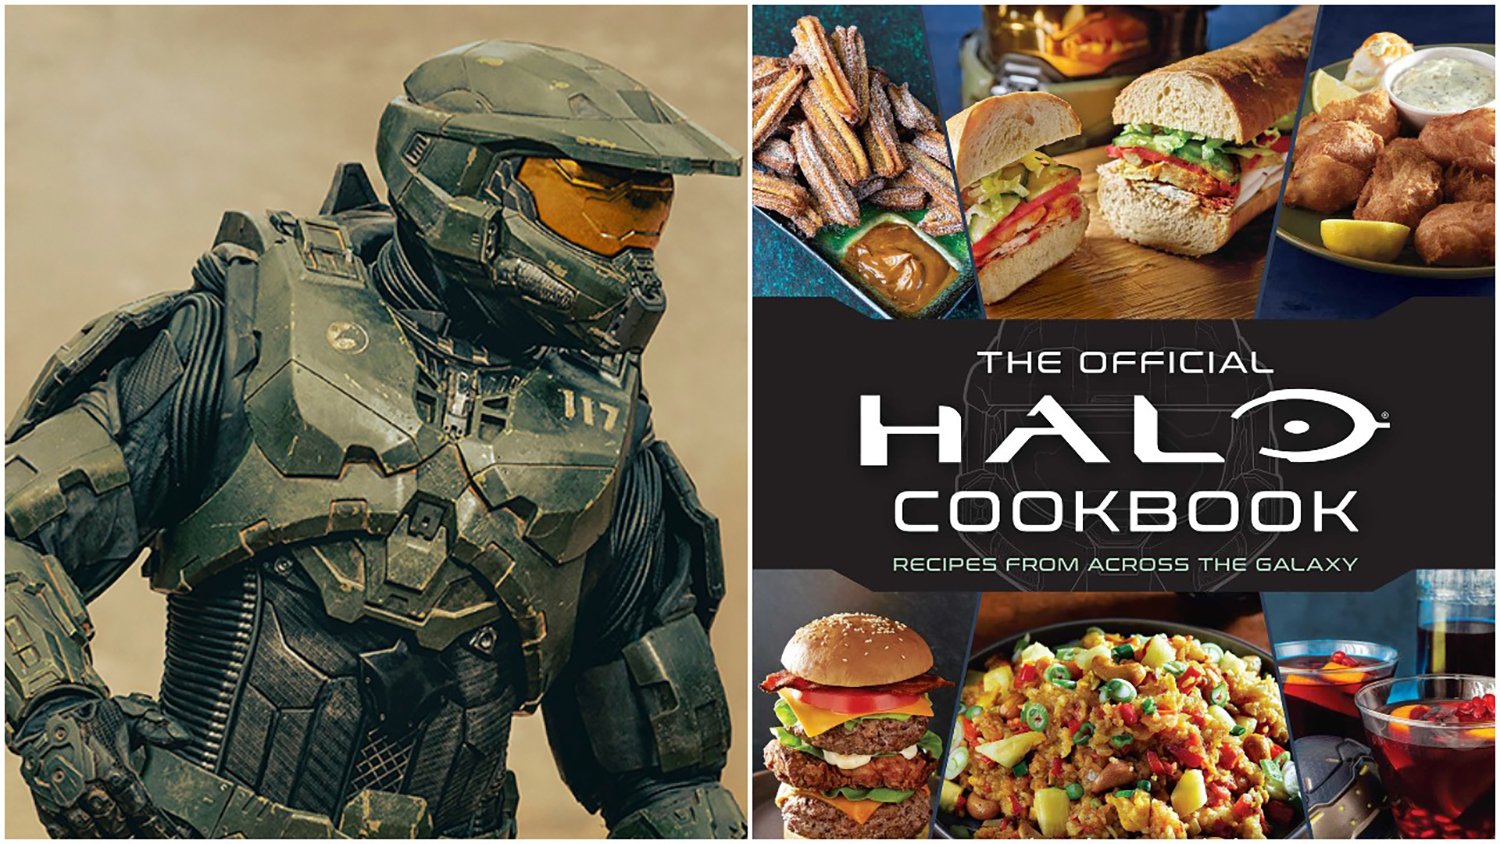 Pablo Schreiber as Master Chief in the Halo TV series // The Halo Official Cookbook cover